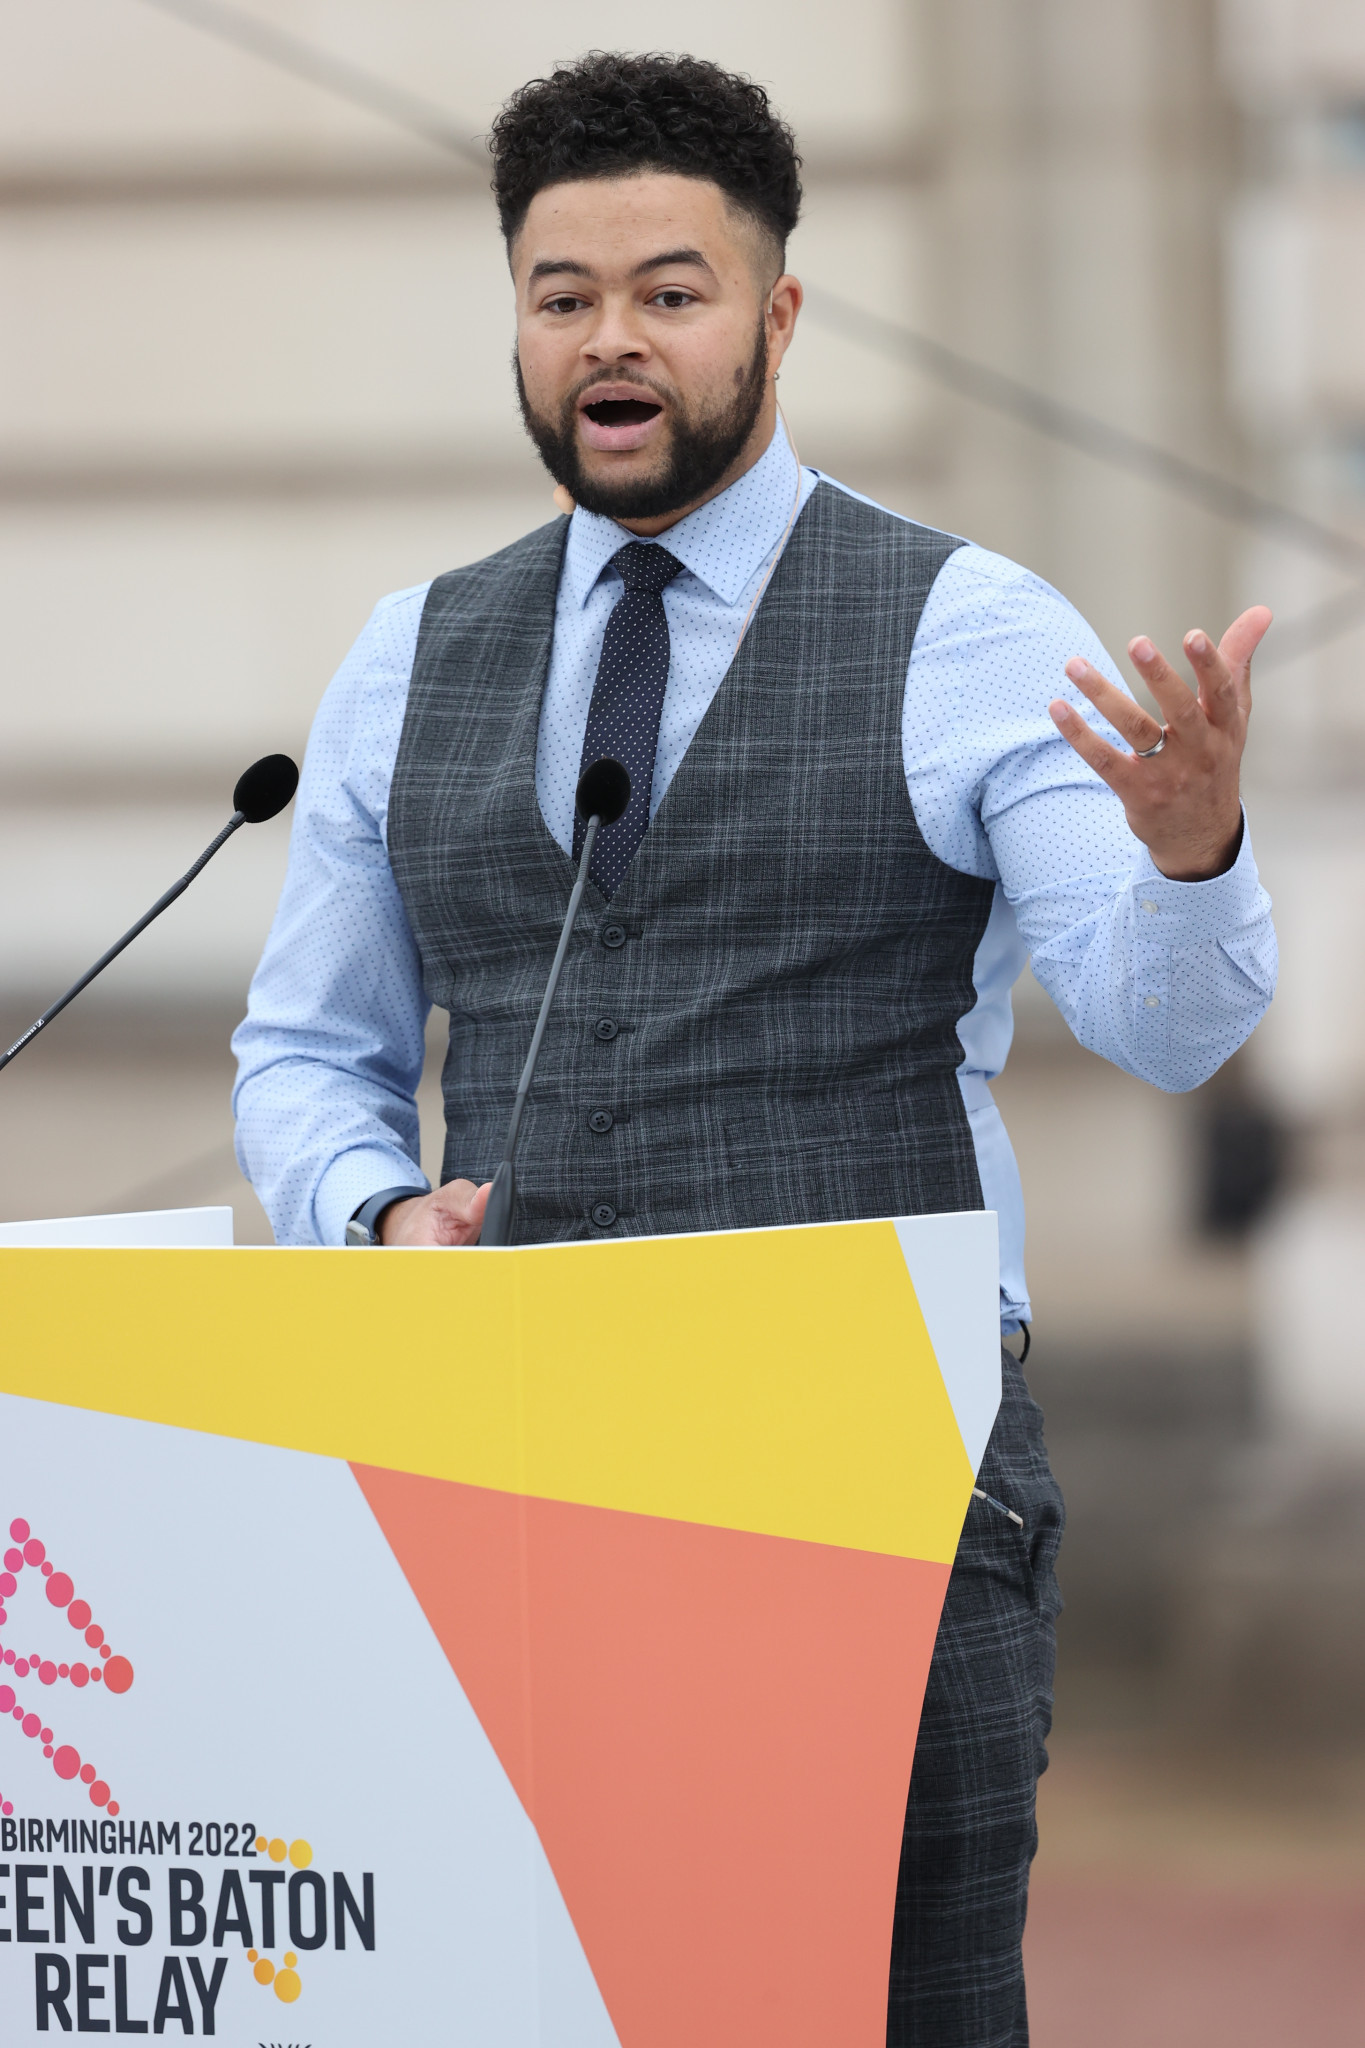 Birmingham poet Casey Bailey is expected to perform in Victoria Square.He recited his poem Take it On at the launch of the Baton Relay at Buckingham Palace ©Getty Images